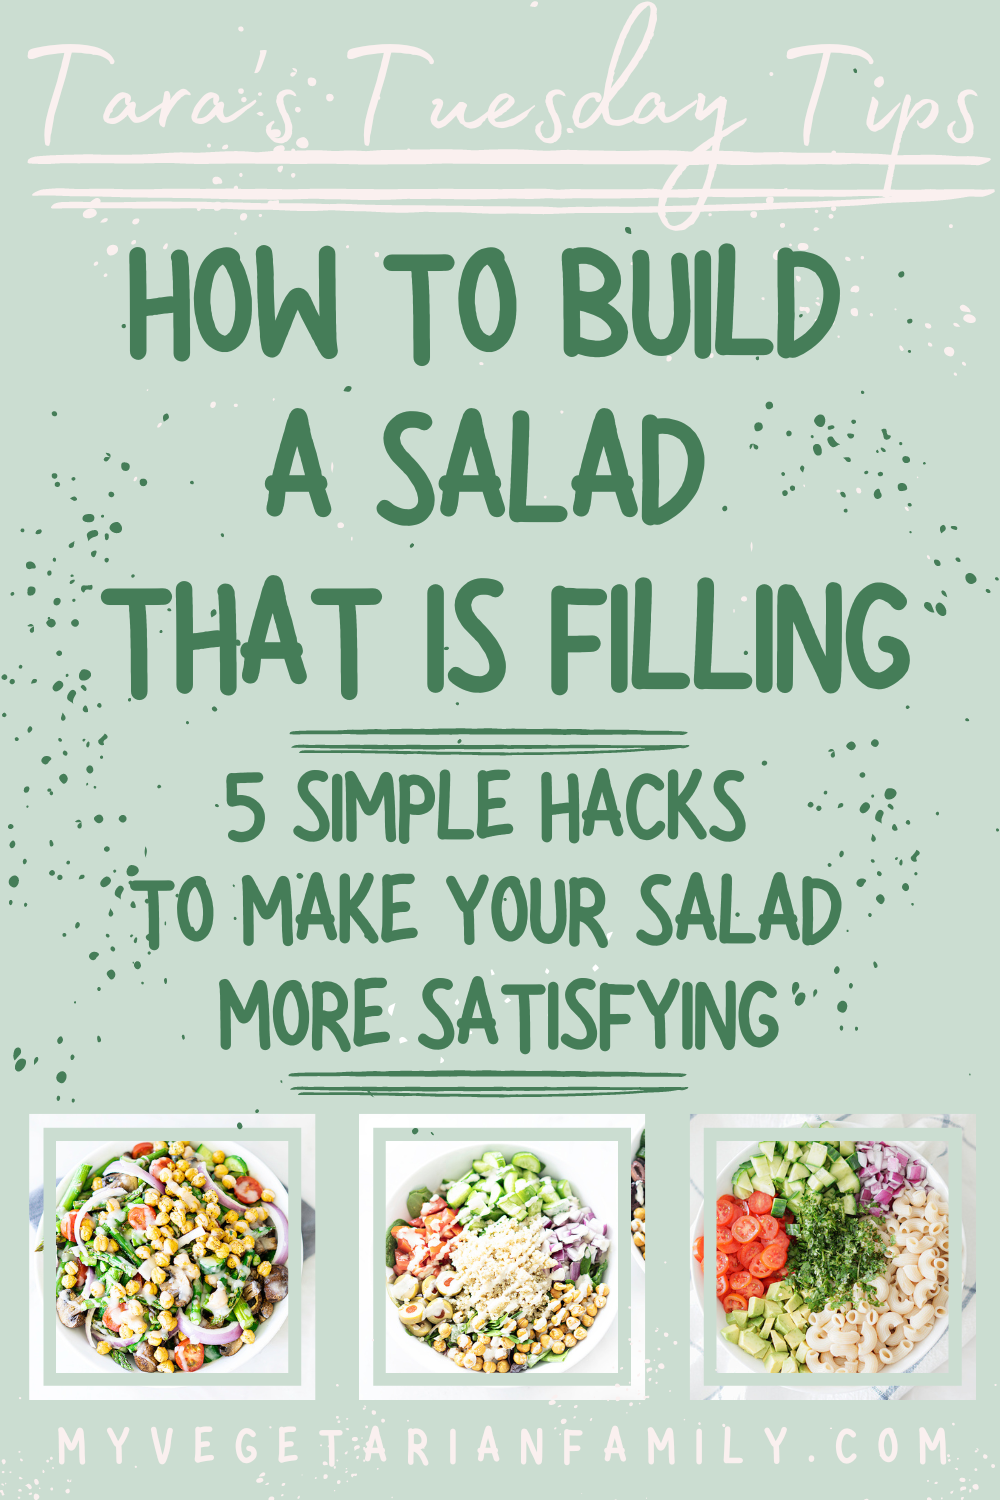 How to Build a Salad That is Filling | My Vegetarian Family | Tara's Tuesday Tips #buildafillingsalad #satisfyingsalads